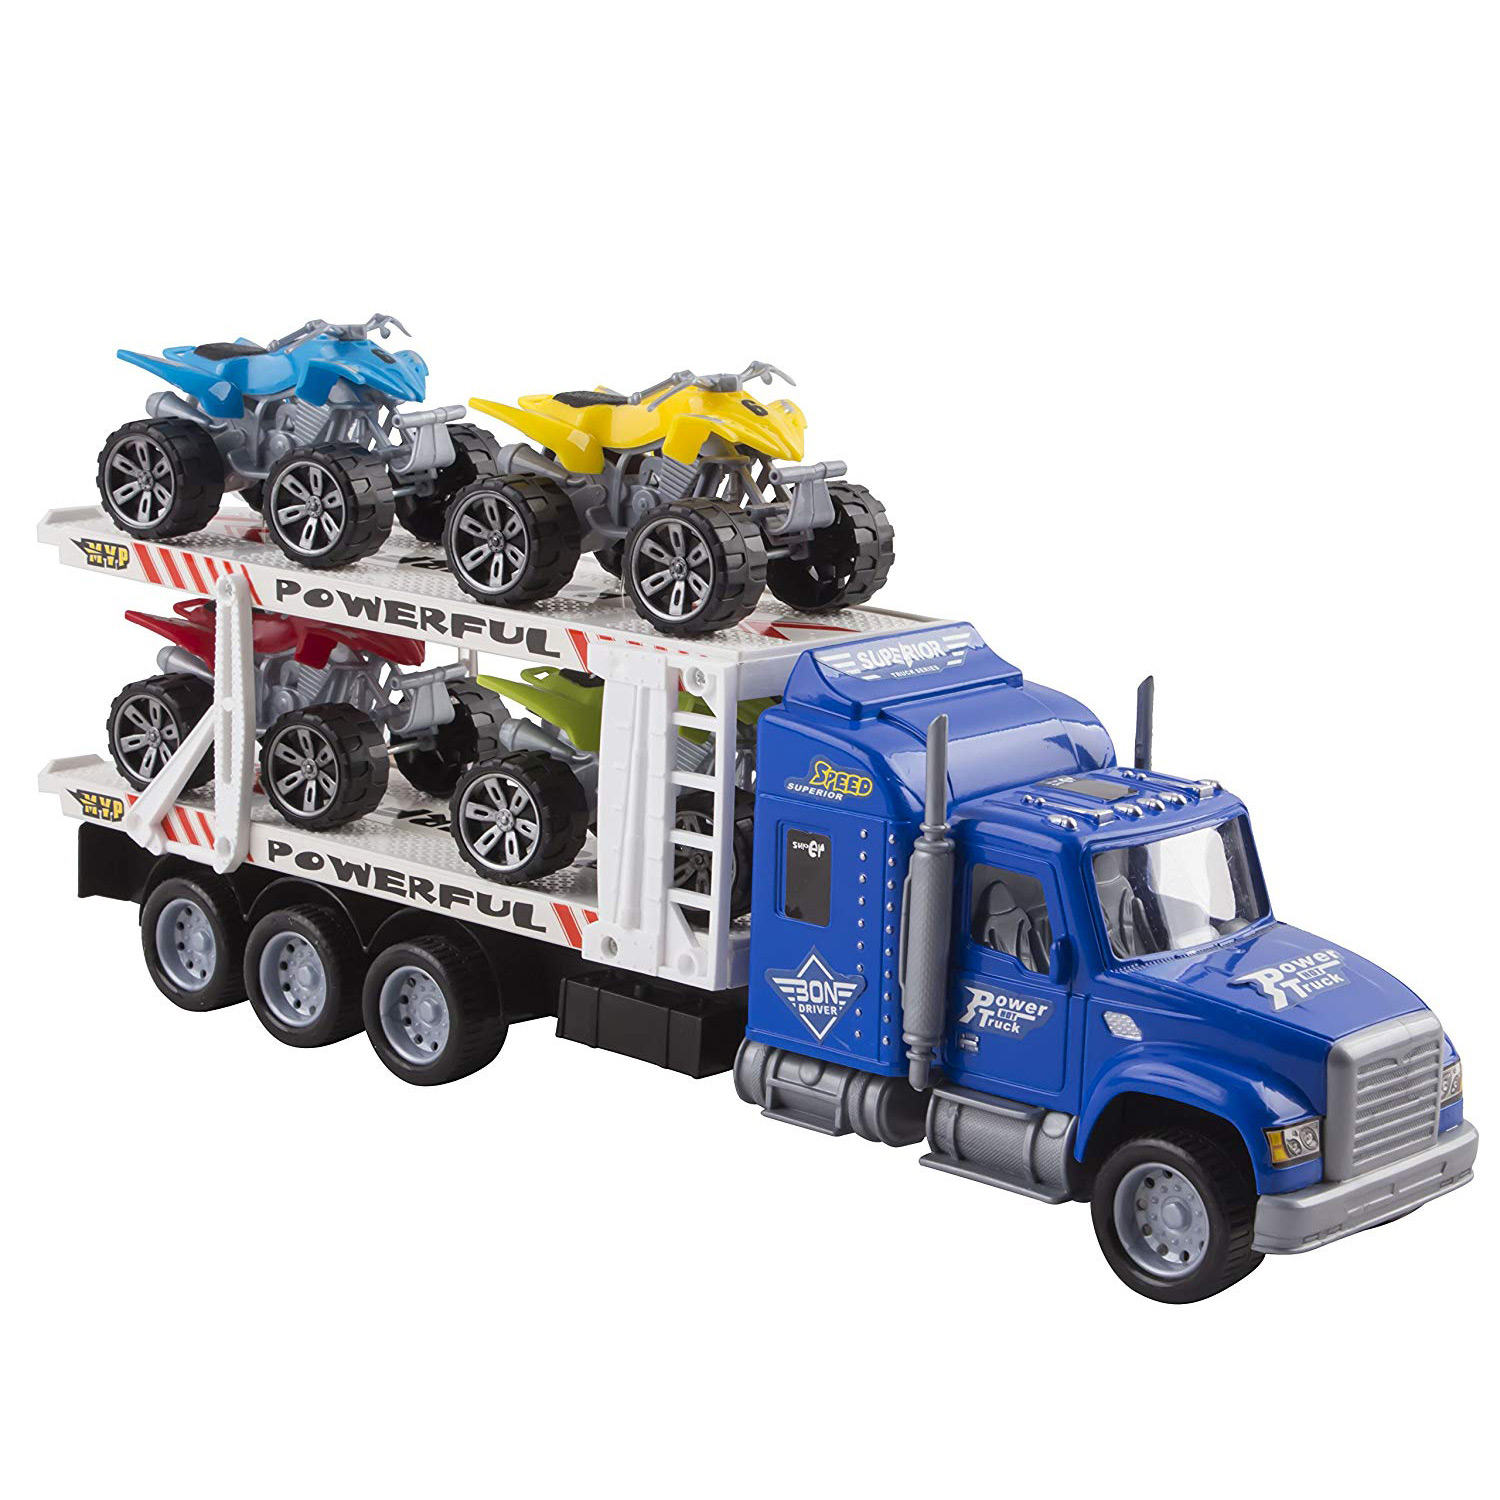 Toy Truck Transporter Trailer 14.5\" Childrenâ€™s Friction Big Rig With 4 ATV Toys No Batteries Or Assembly Required Perfect Semi Truck For Kids (Blue Truck)